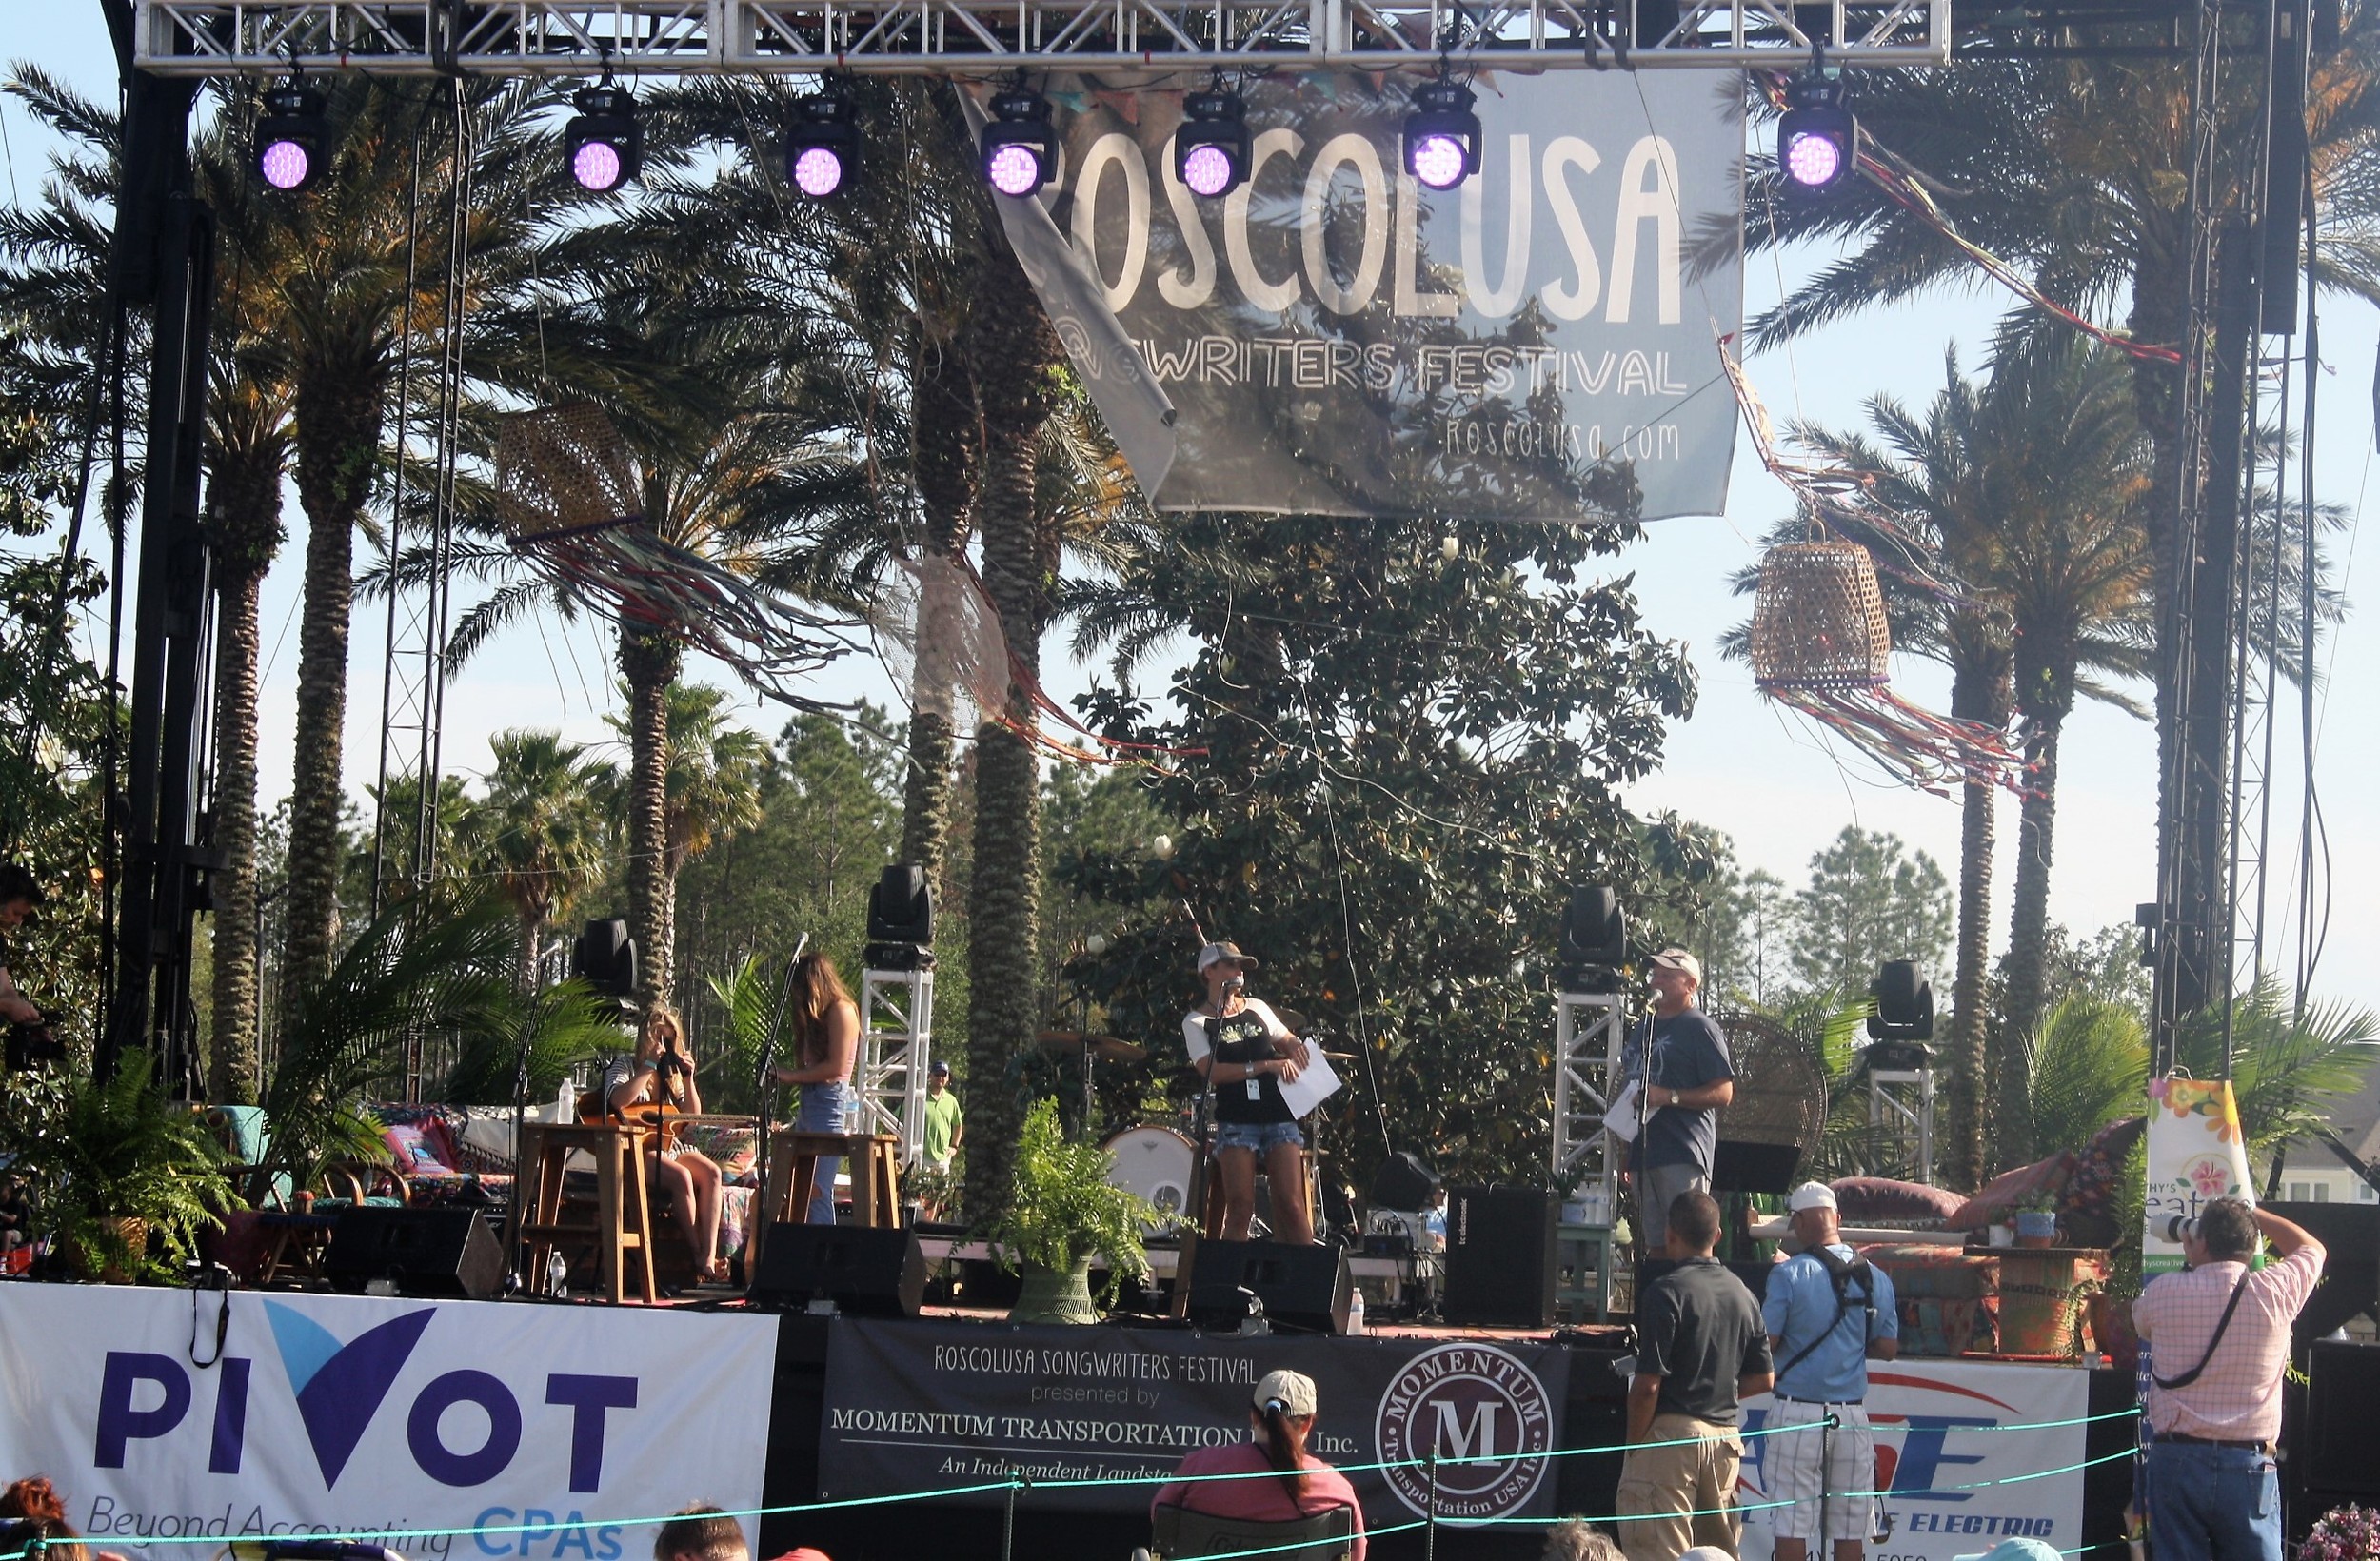 Gator Country DJ Eden Kendall welcomes attendees to the 6th Annual Roscolusa Songwriters Festival.